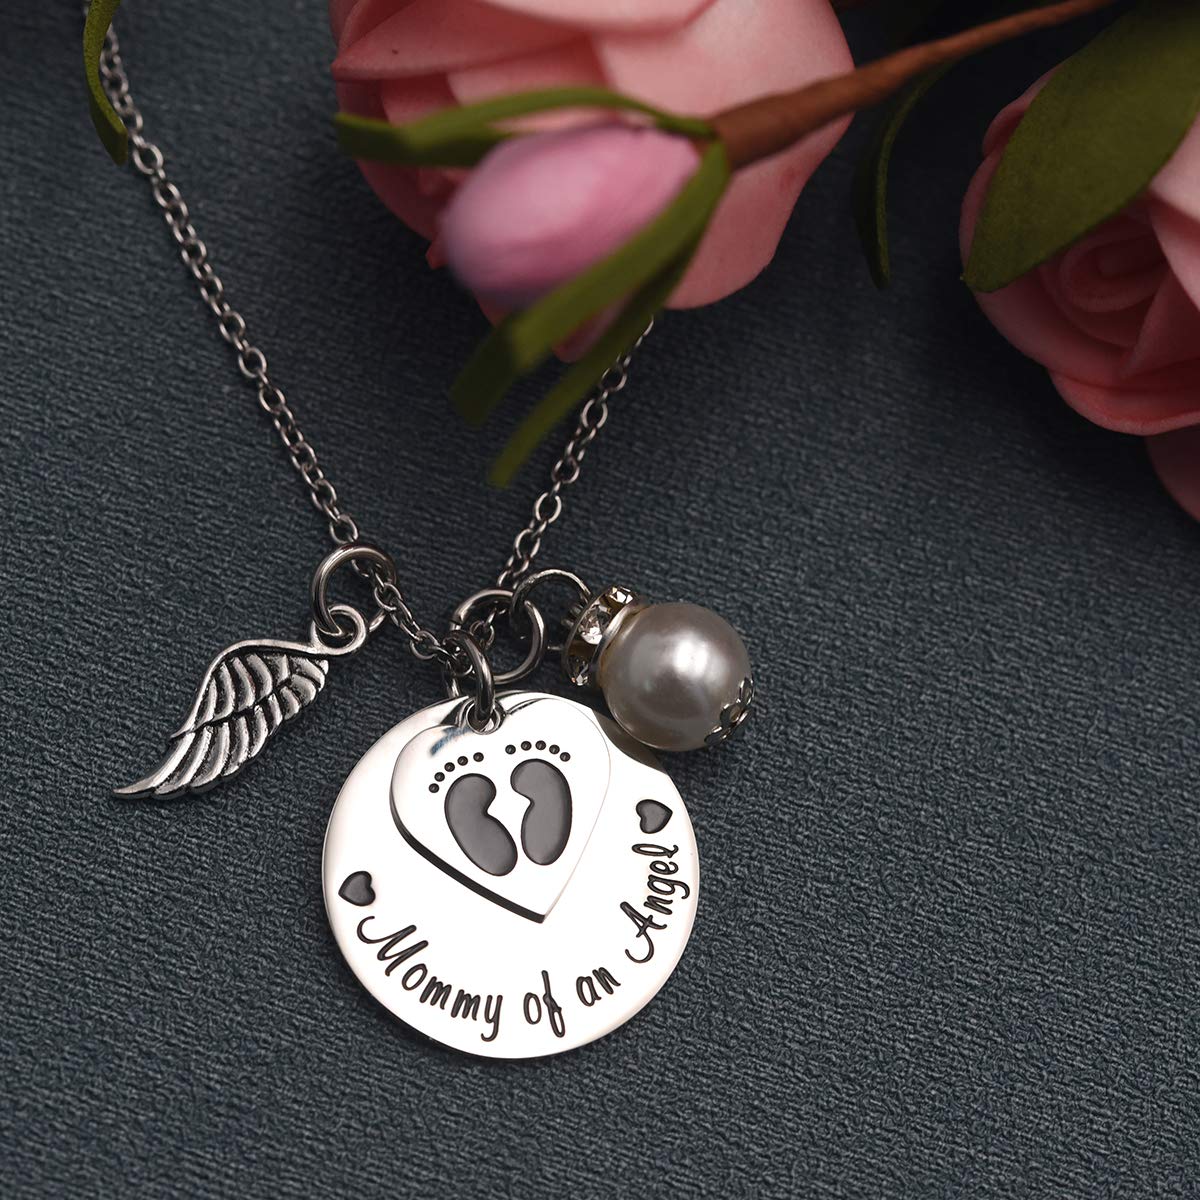 Engraved Miscarriage keepsake baby loss gift miscarriage necklace pregnancy  loss | eBay